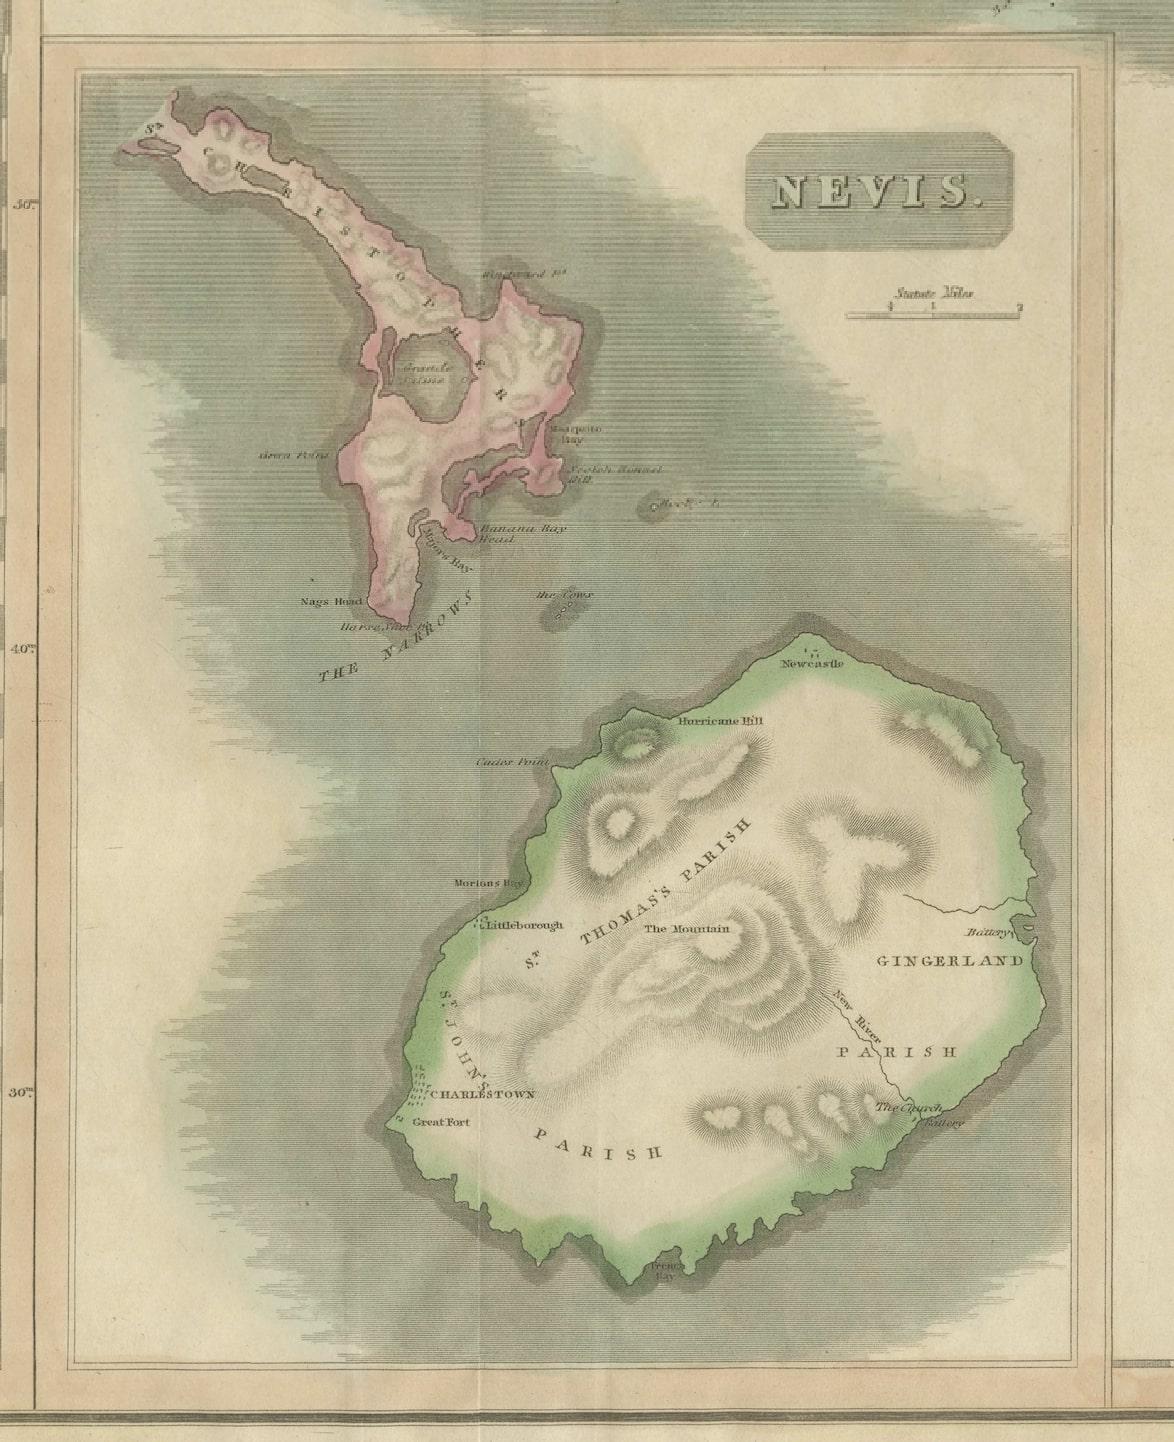 Engraved 1817 John Thomson's Handcolored Antique Map of St. Kitts, Nevis, and St. Lucia  For Sale